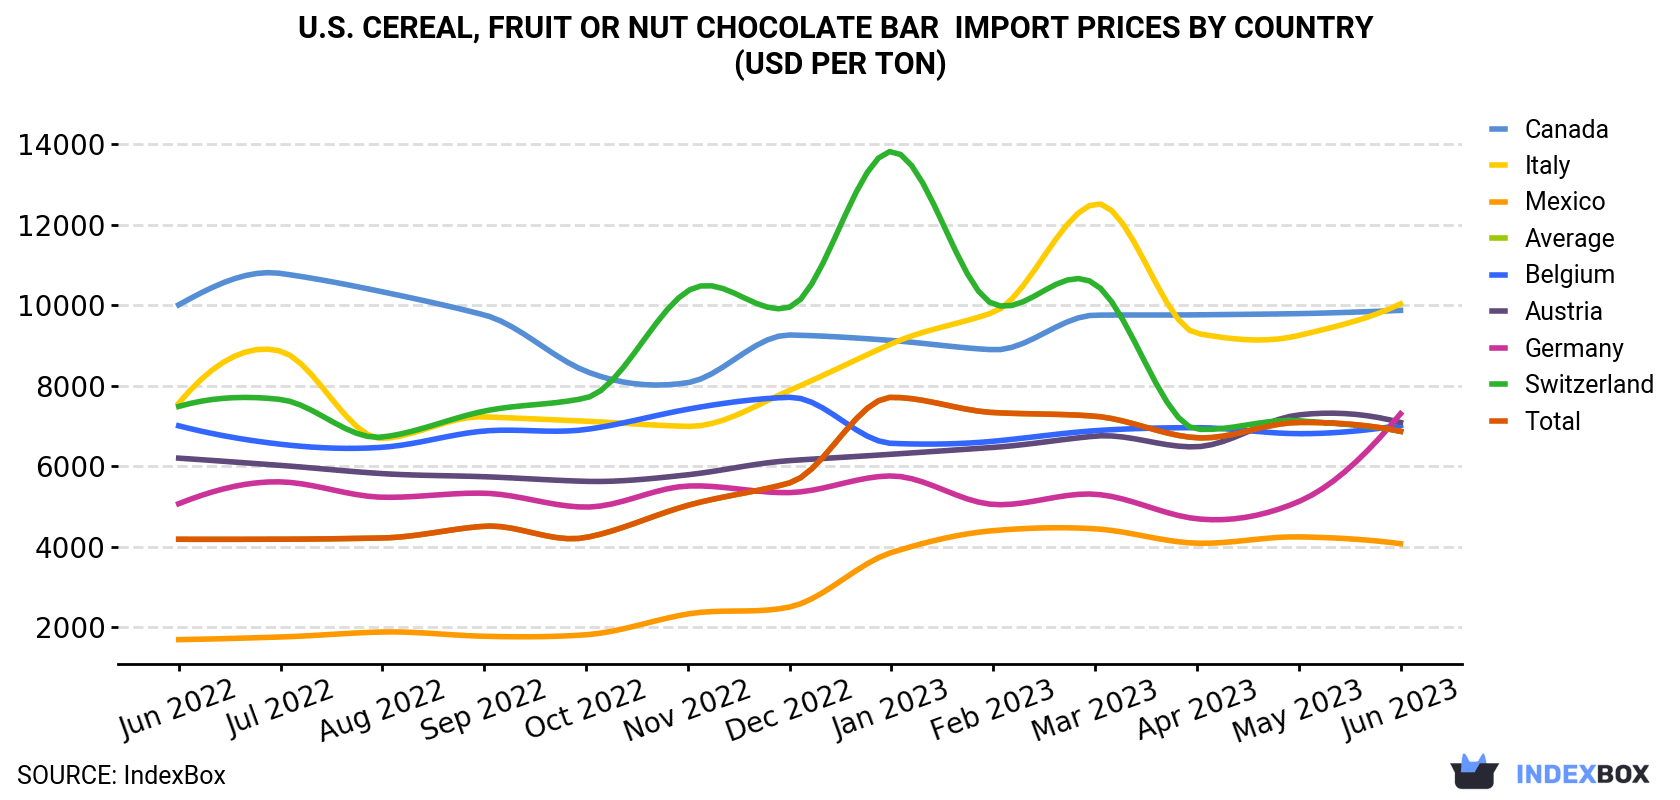 U.S. Cereal, Fruit or Nut Chocolate Bar Import Prices By Country (USD Per Ton)